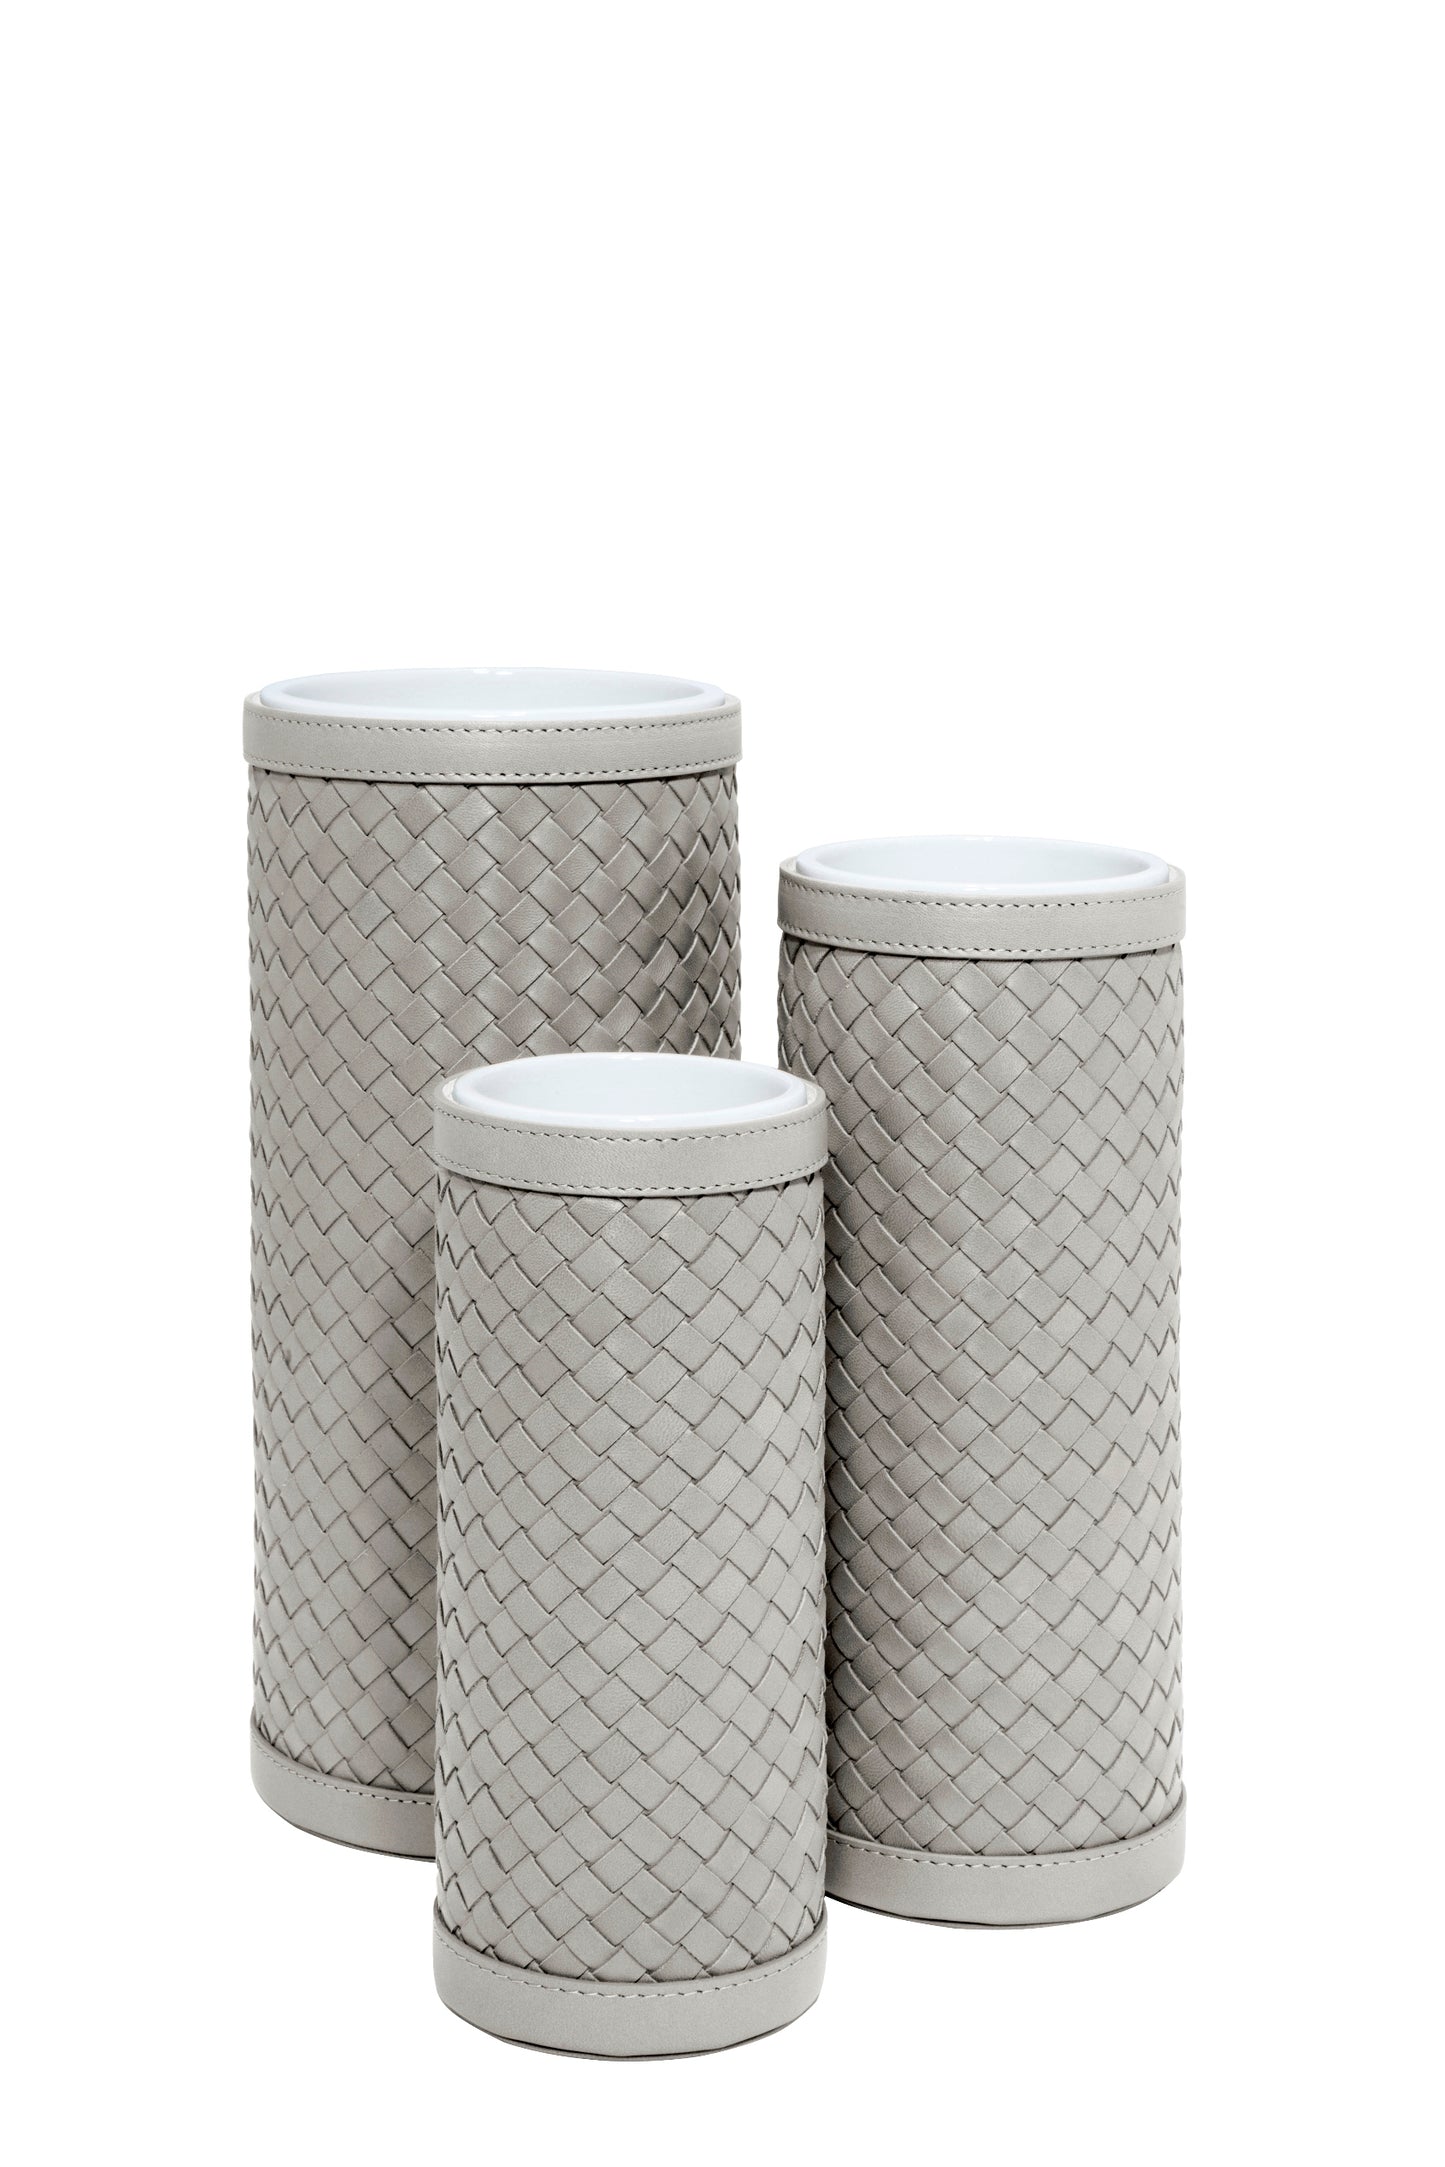 Riviere Ester Ceramic Vase With Handwoven Leather Cover | Exquisite Ceramic Vase Design | Handwoven Leather Cover for Added Elegance | Elevate Your Home Decor with Luxury Accessories from Riviere | Available at 2Jour Concierge, #1 luxury high-end gift & lifestyle shop